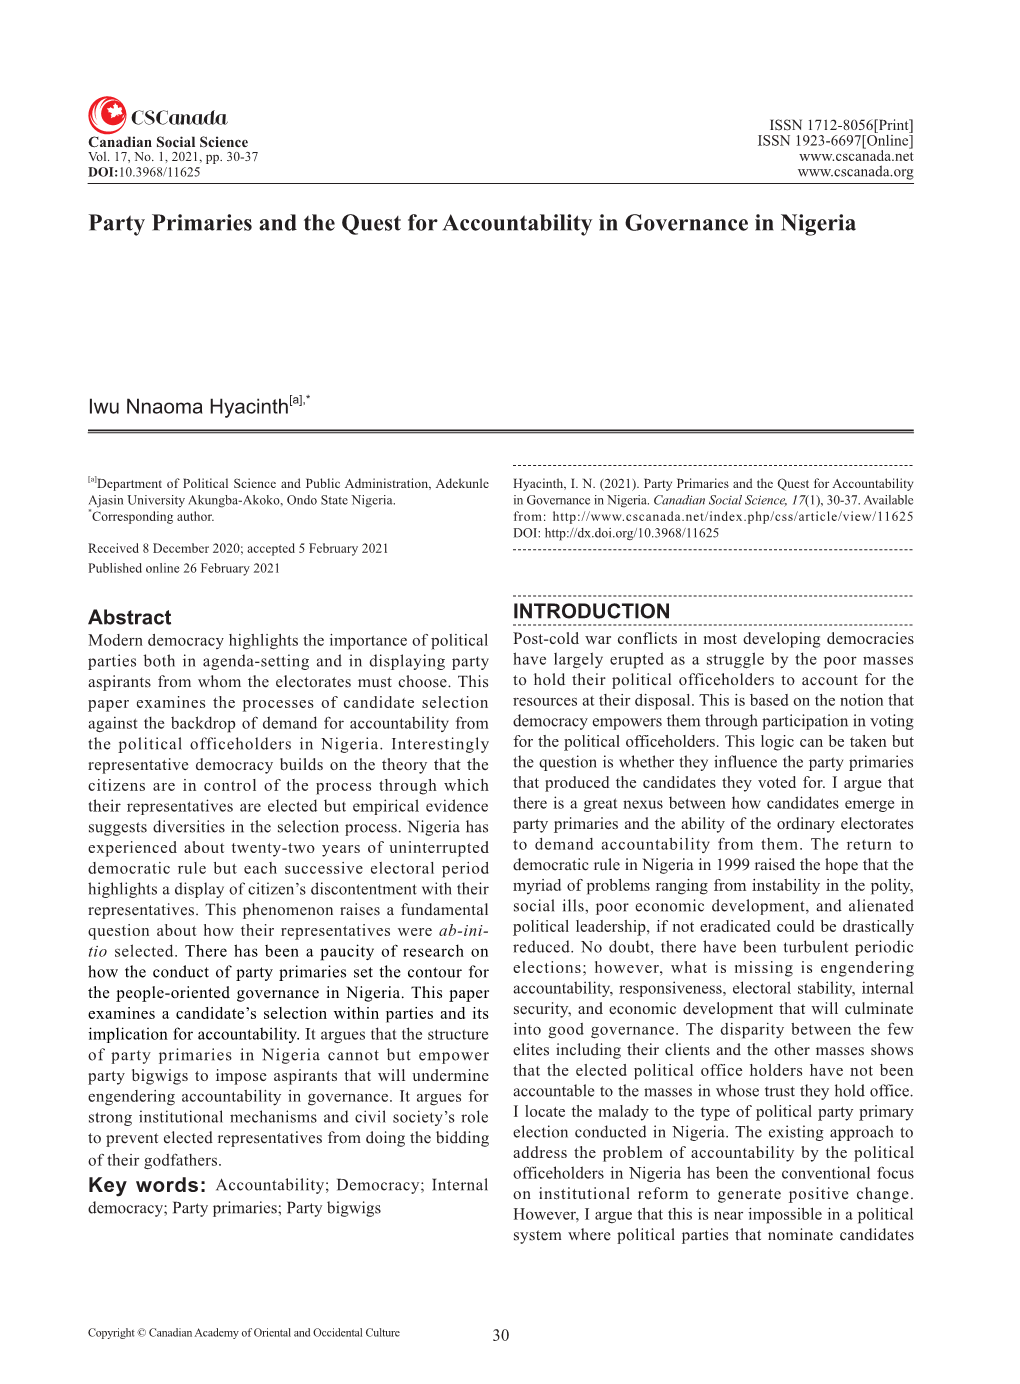 Party Primaries and the Quest for Accountability in Governance in Nigeria